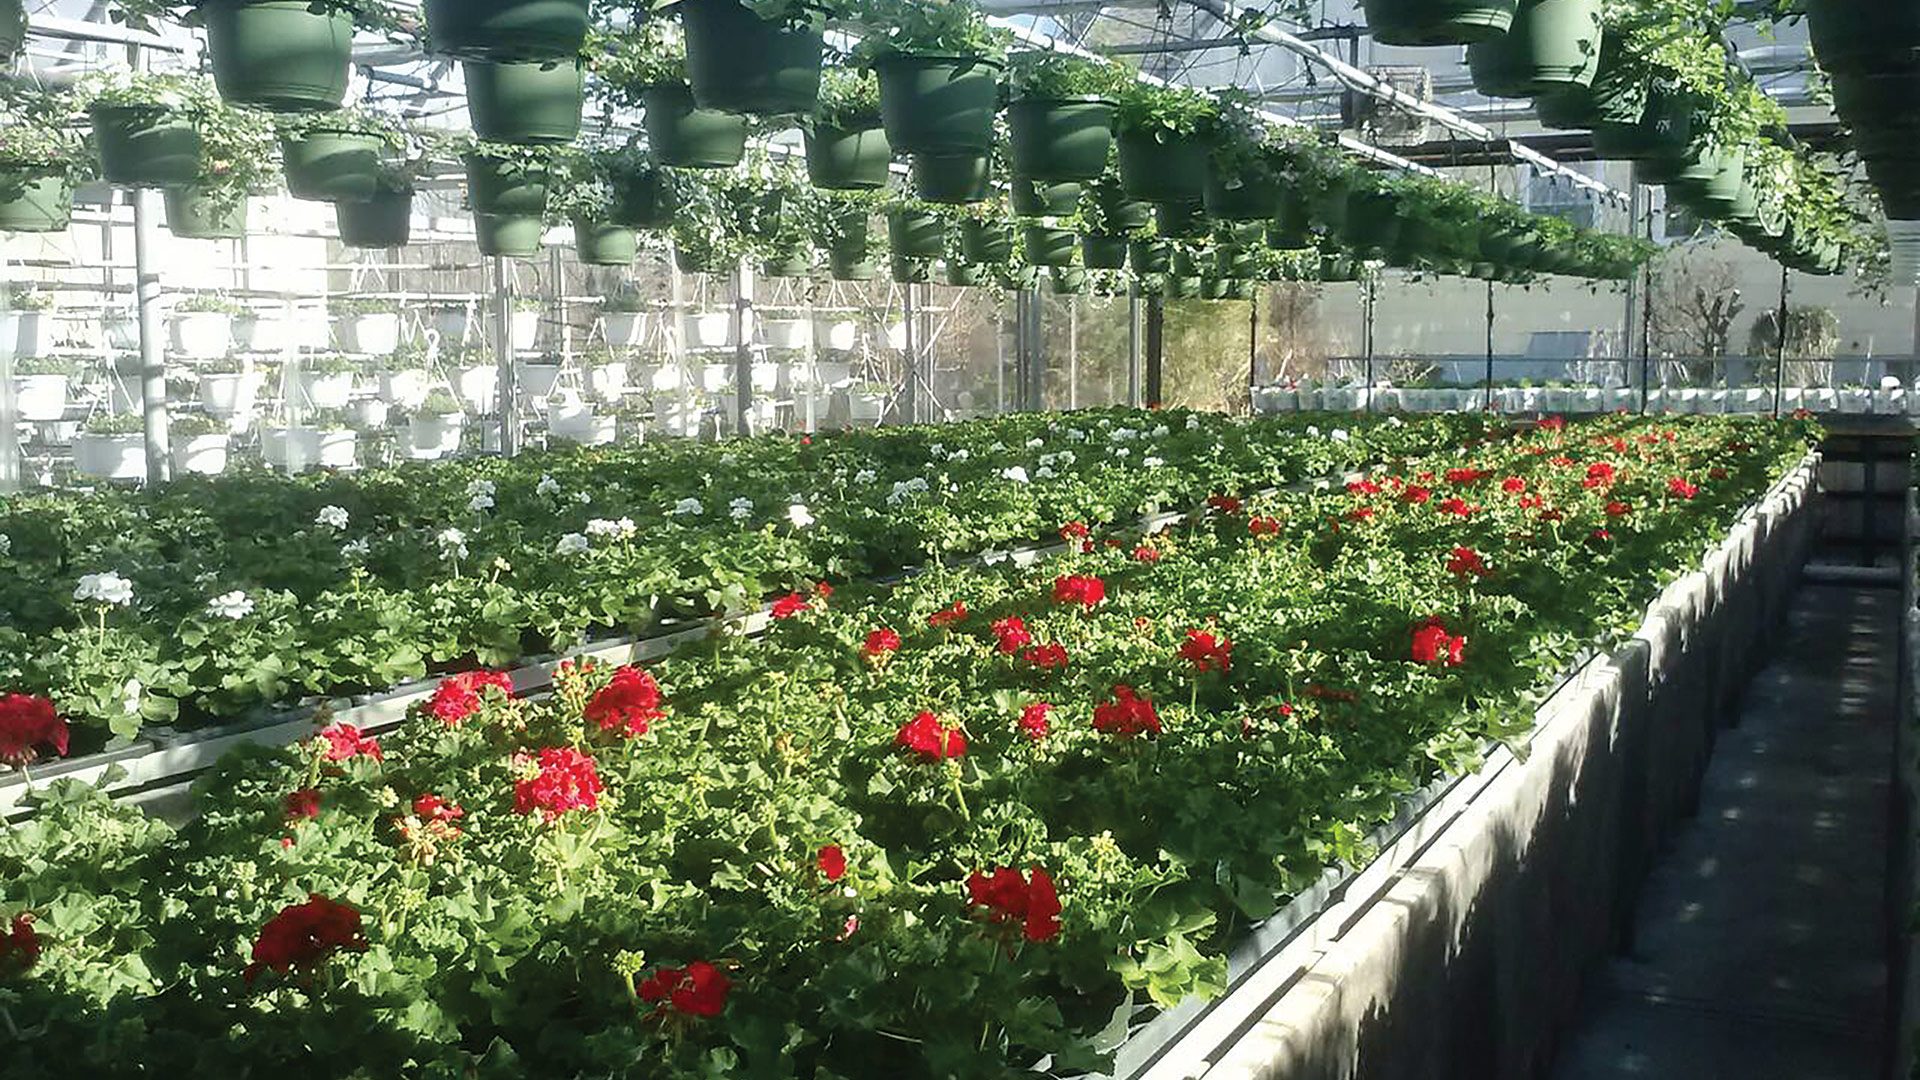 Dave Graziano says his garden center sold out of many popular plants last year.